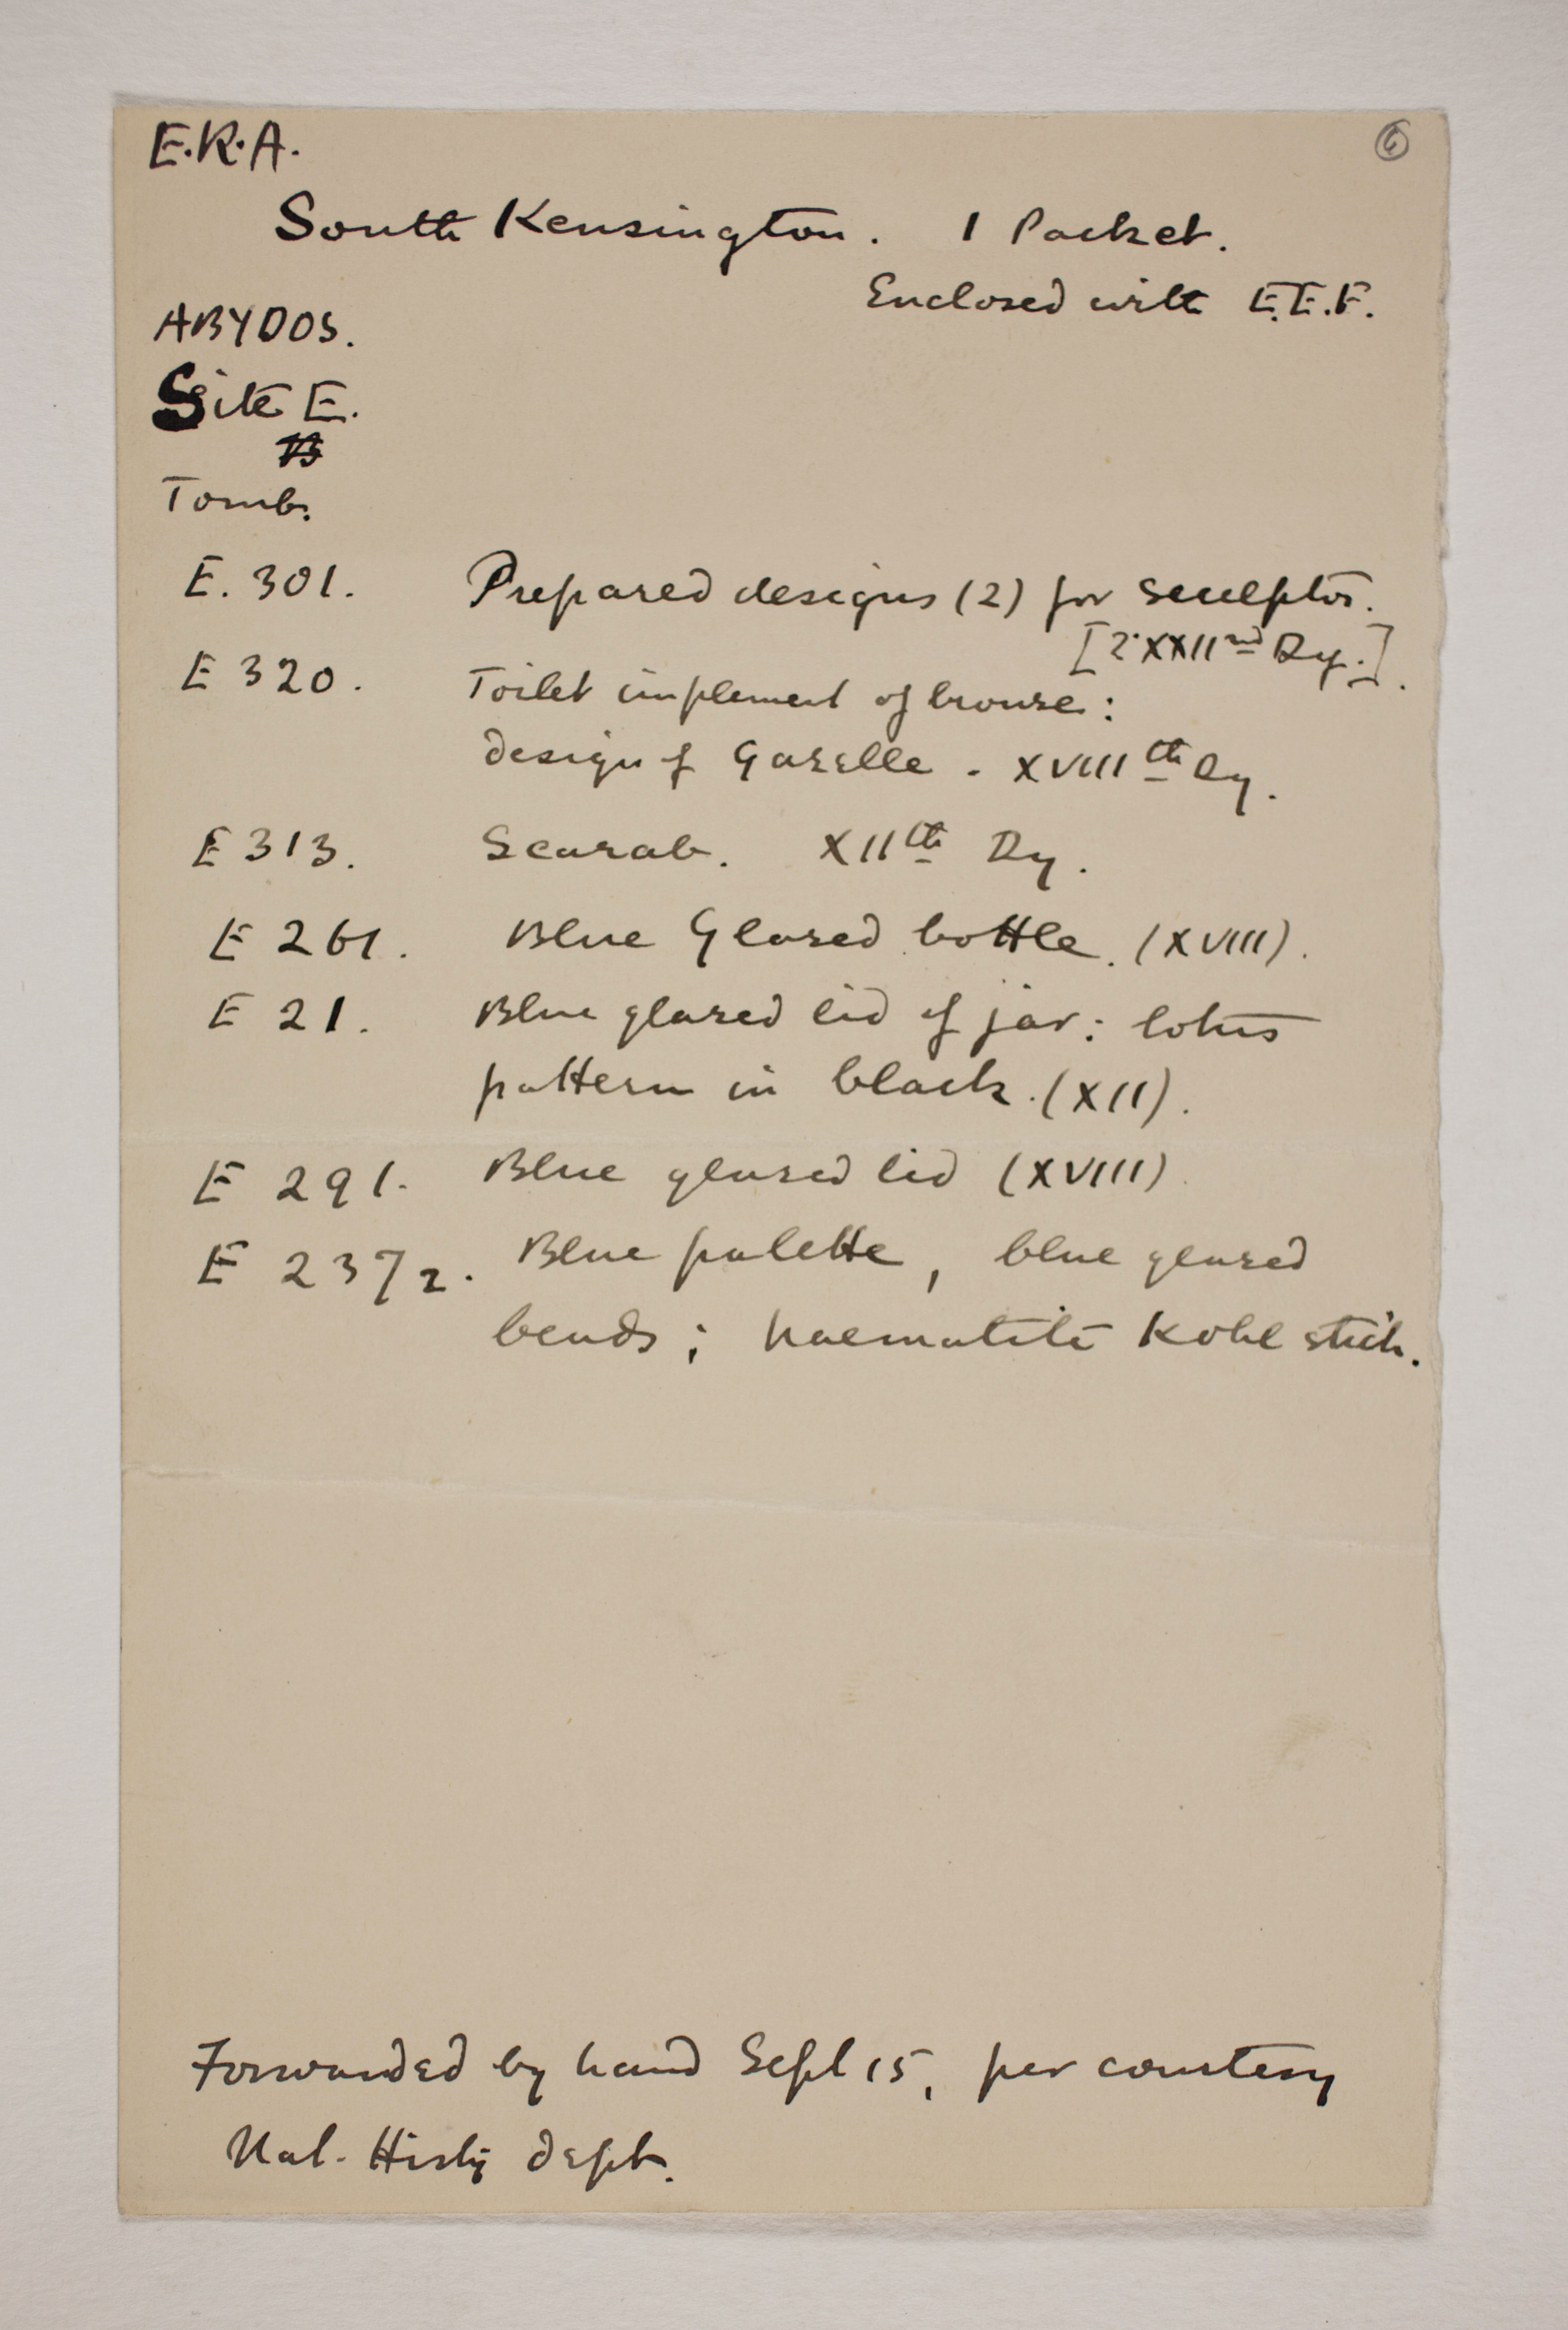 1899-1900 Abydos Individual institution list  PMA/WFP1/D/8/6